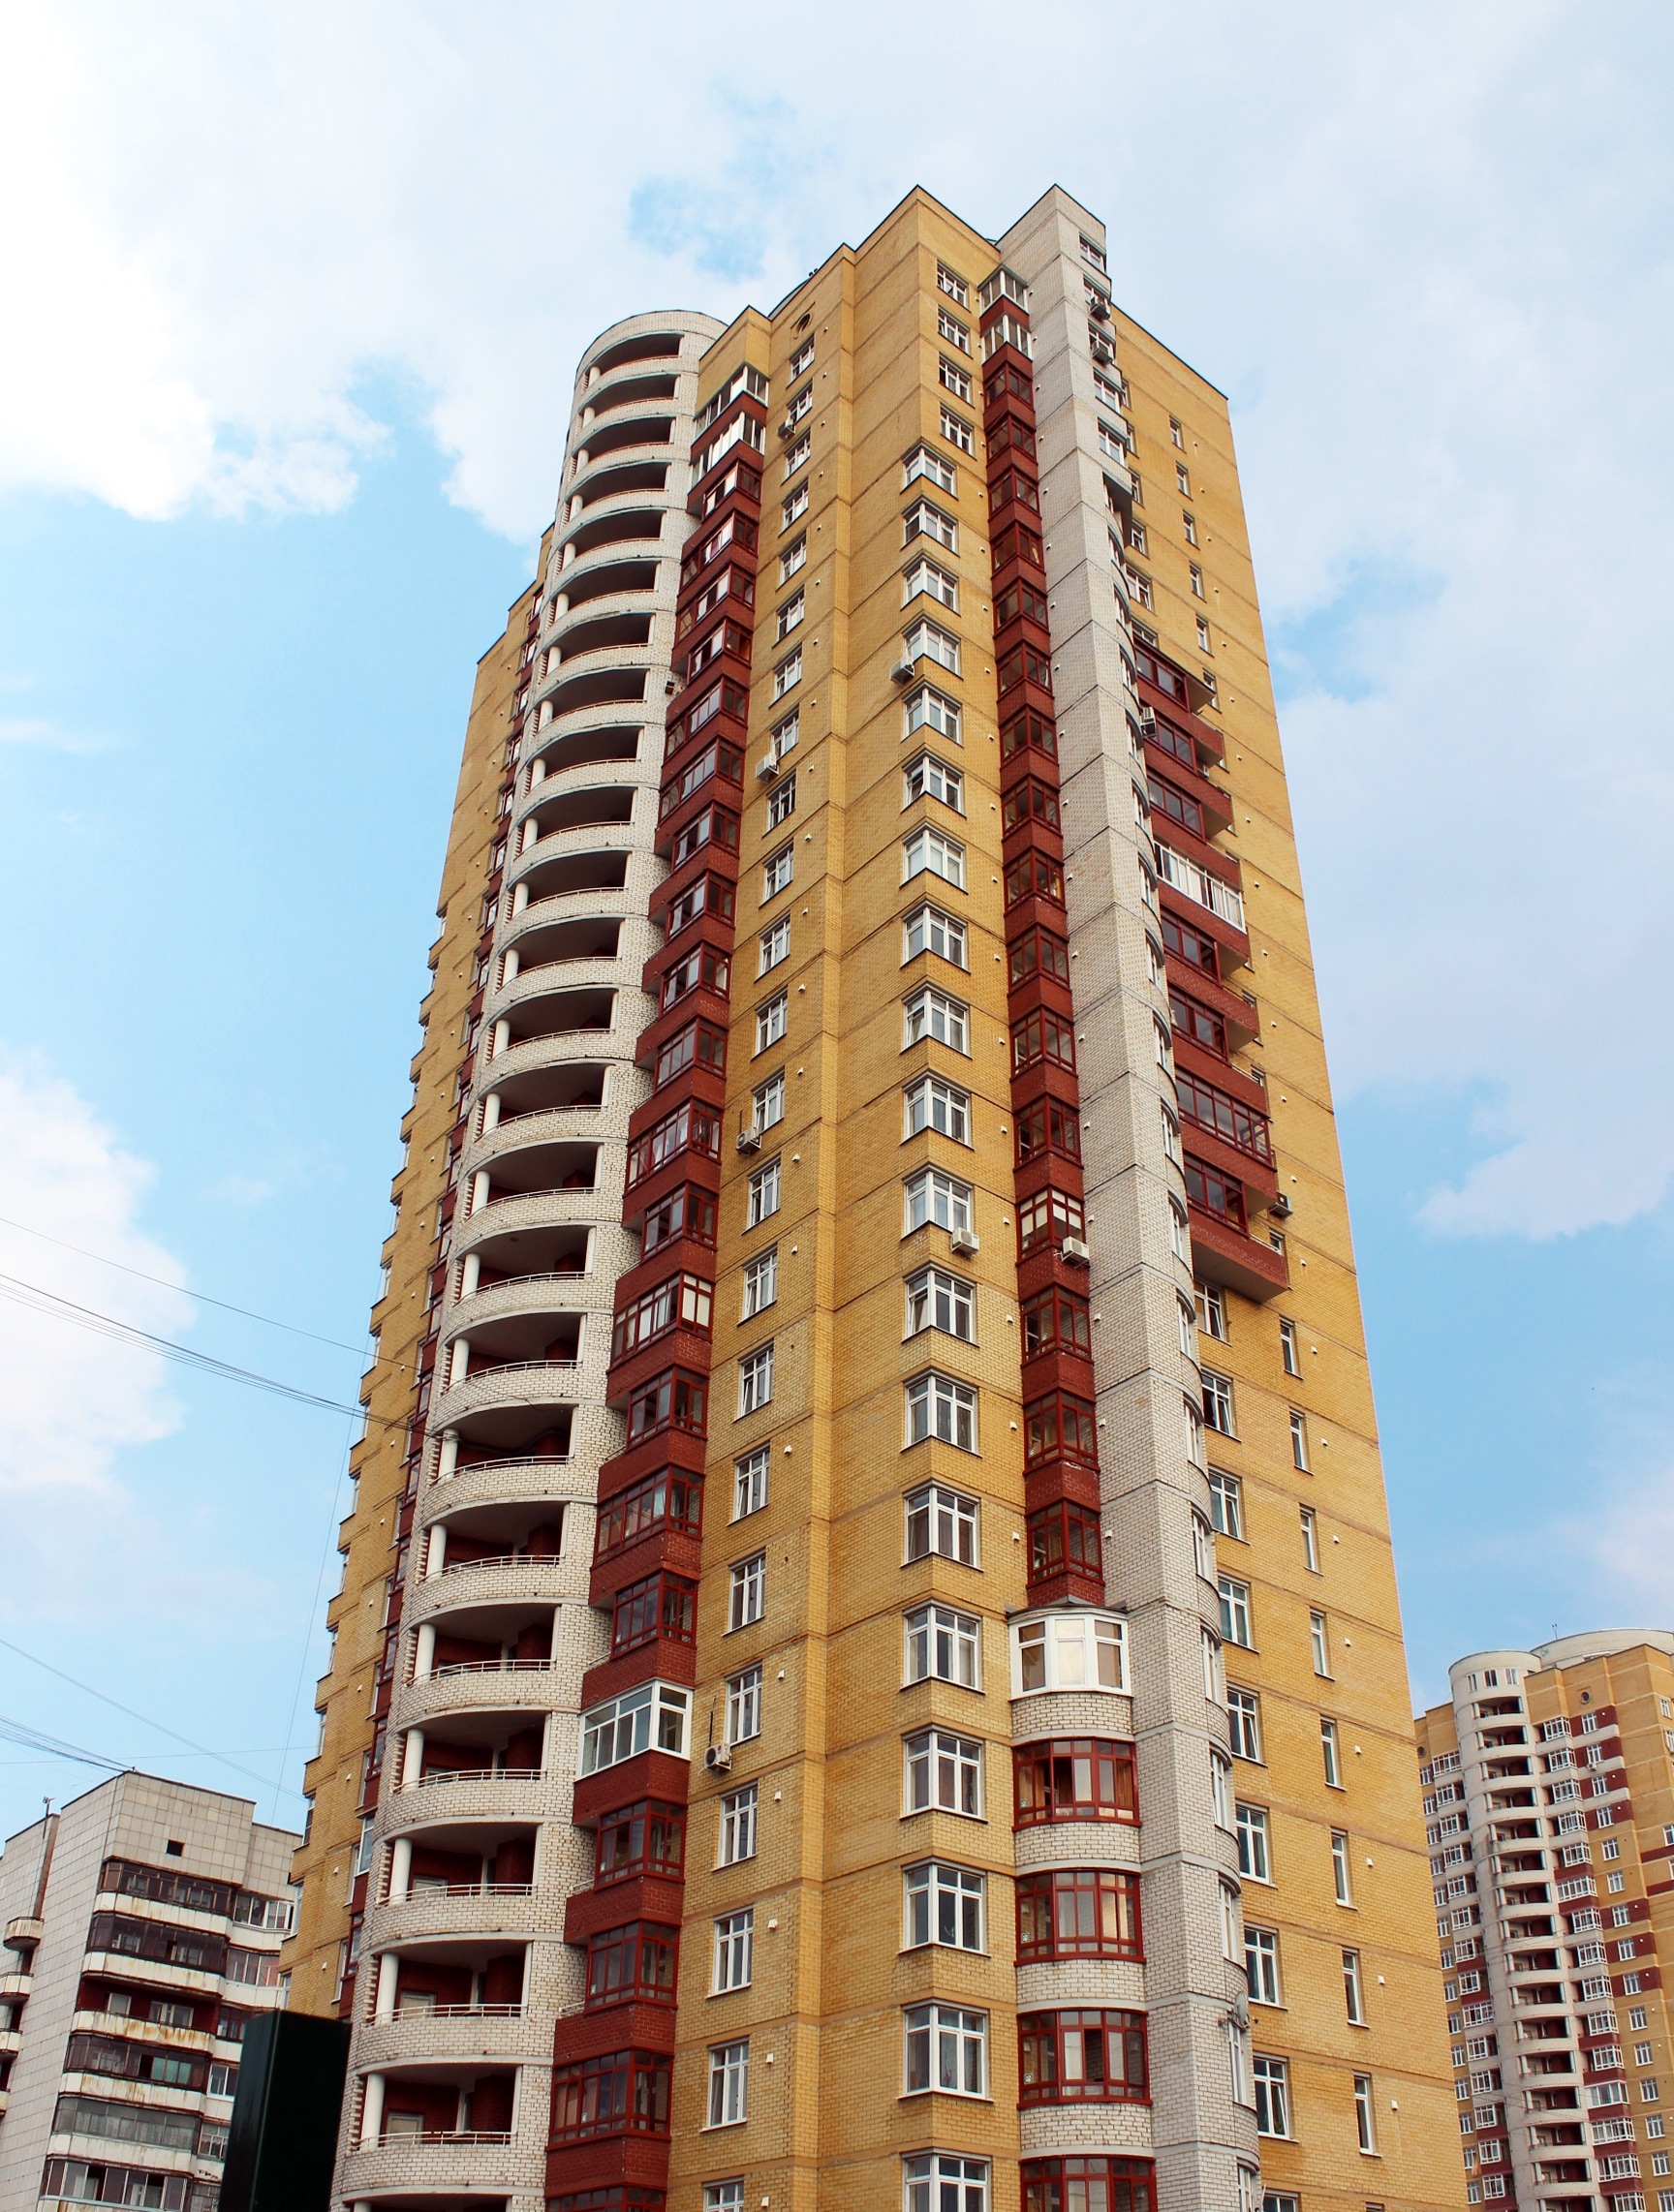 yellow red and beige concrete high rise building